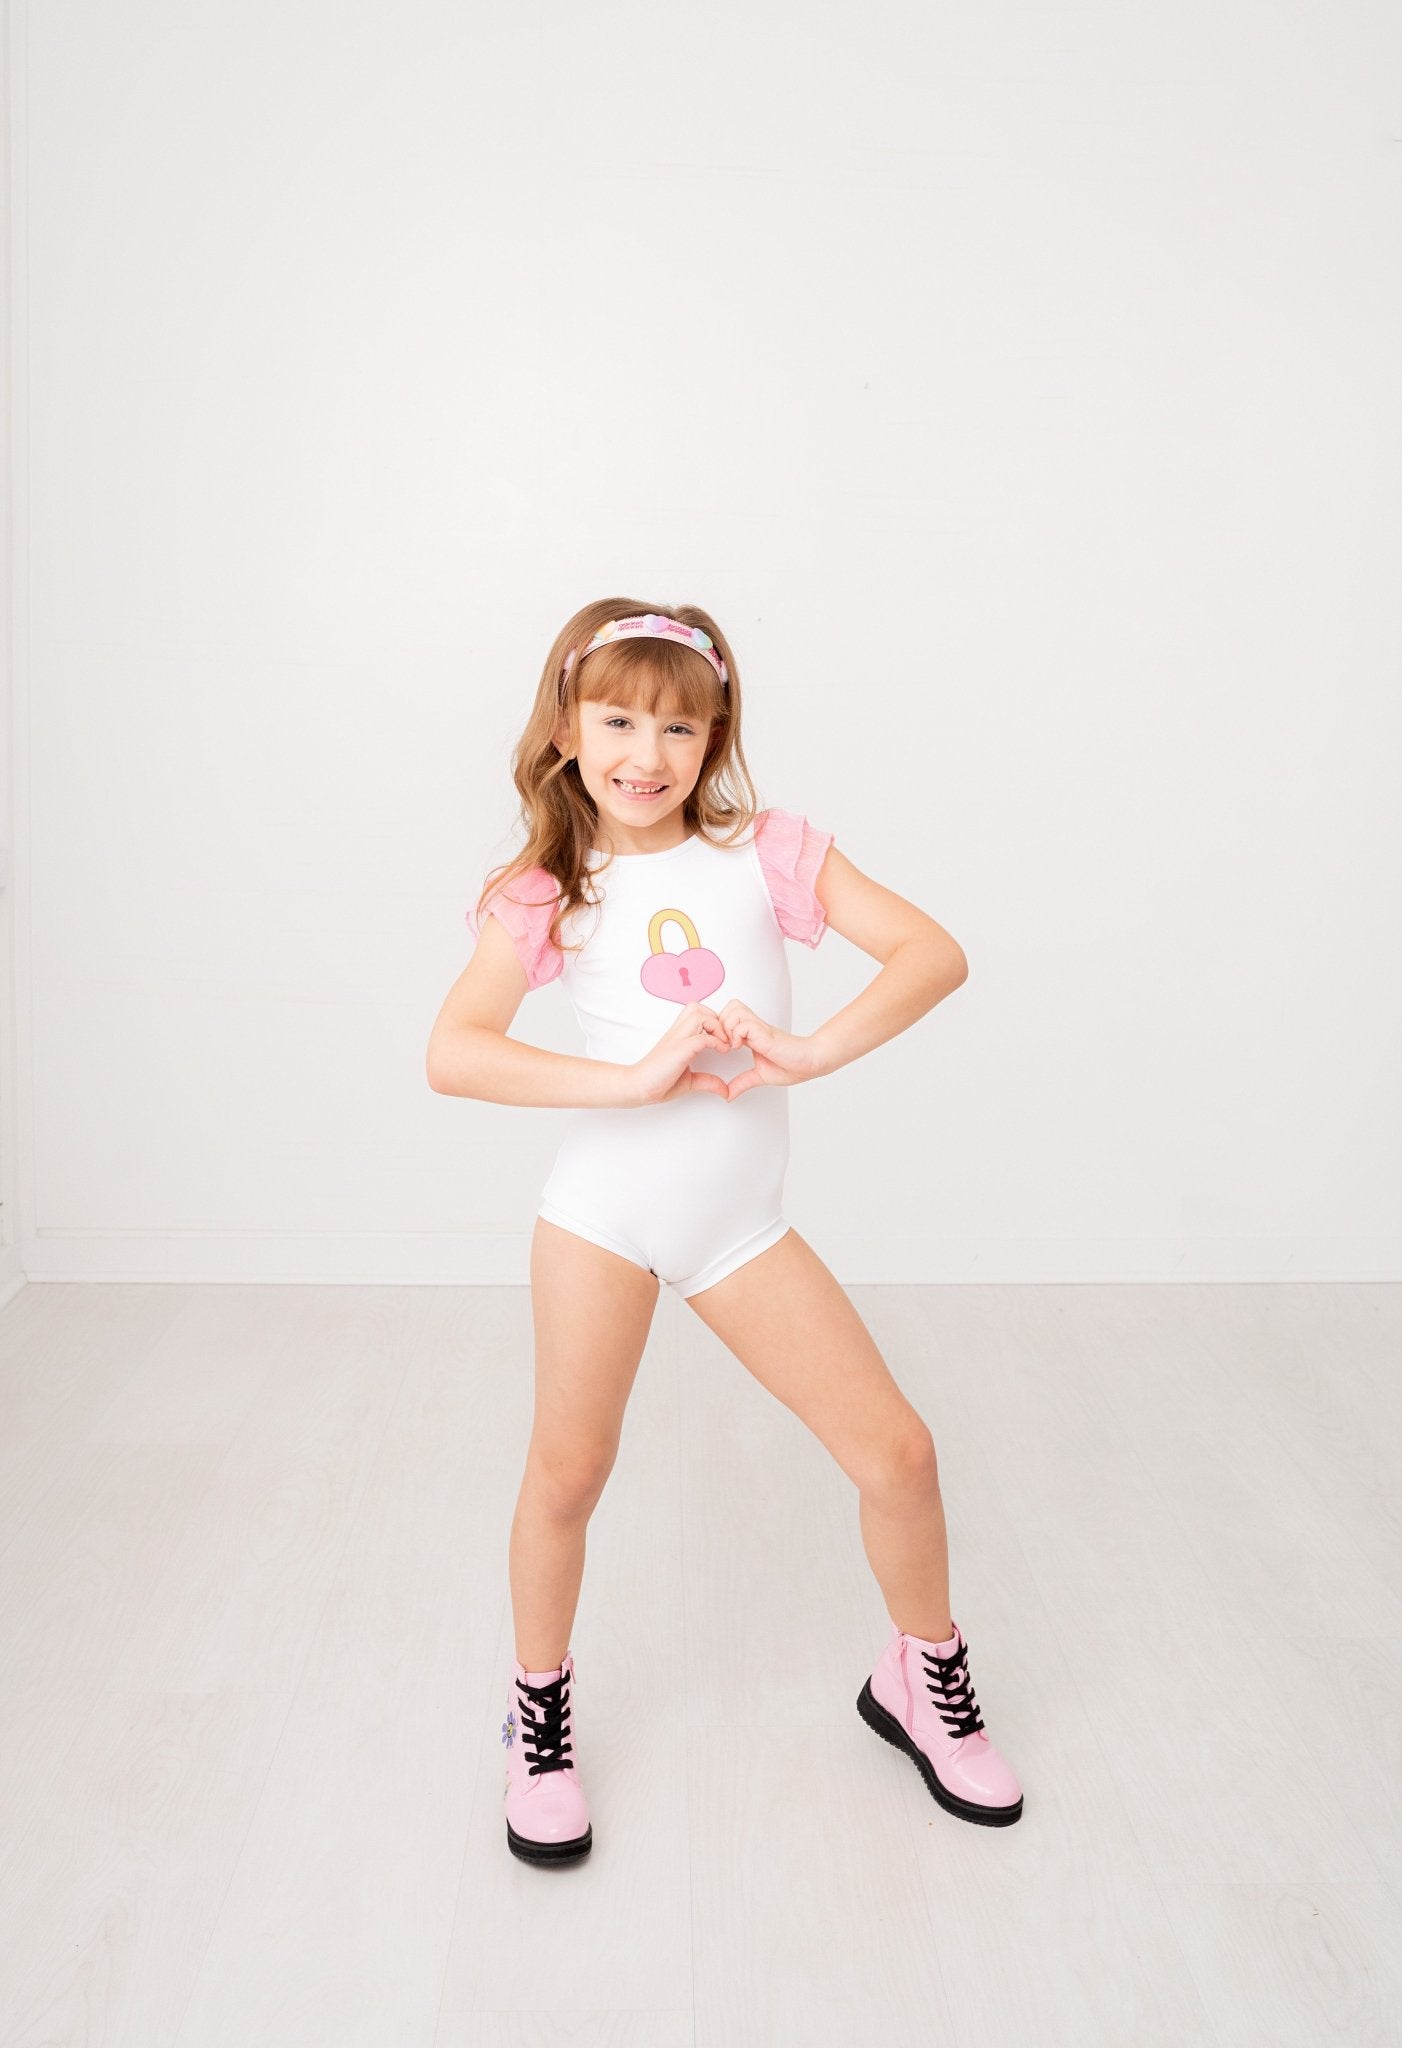 Beary Loved Cotton Candy Pink and White Leotard and Skort Set - Evie's Closet Clothing